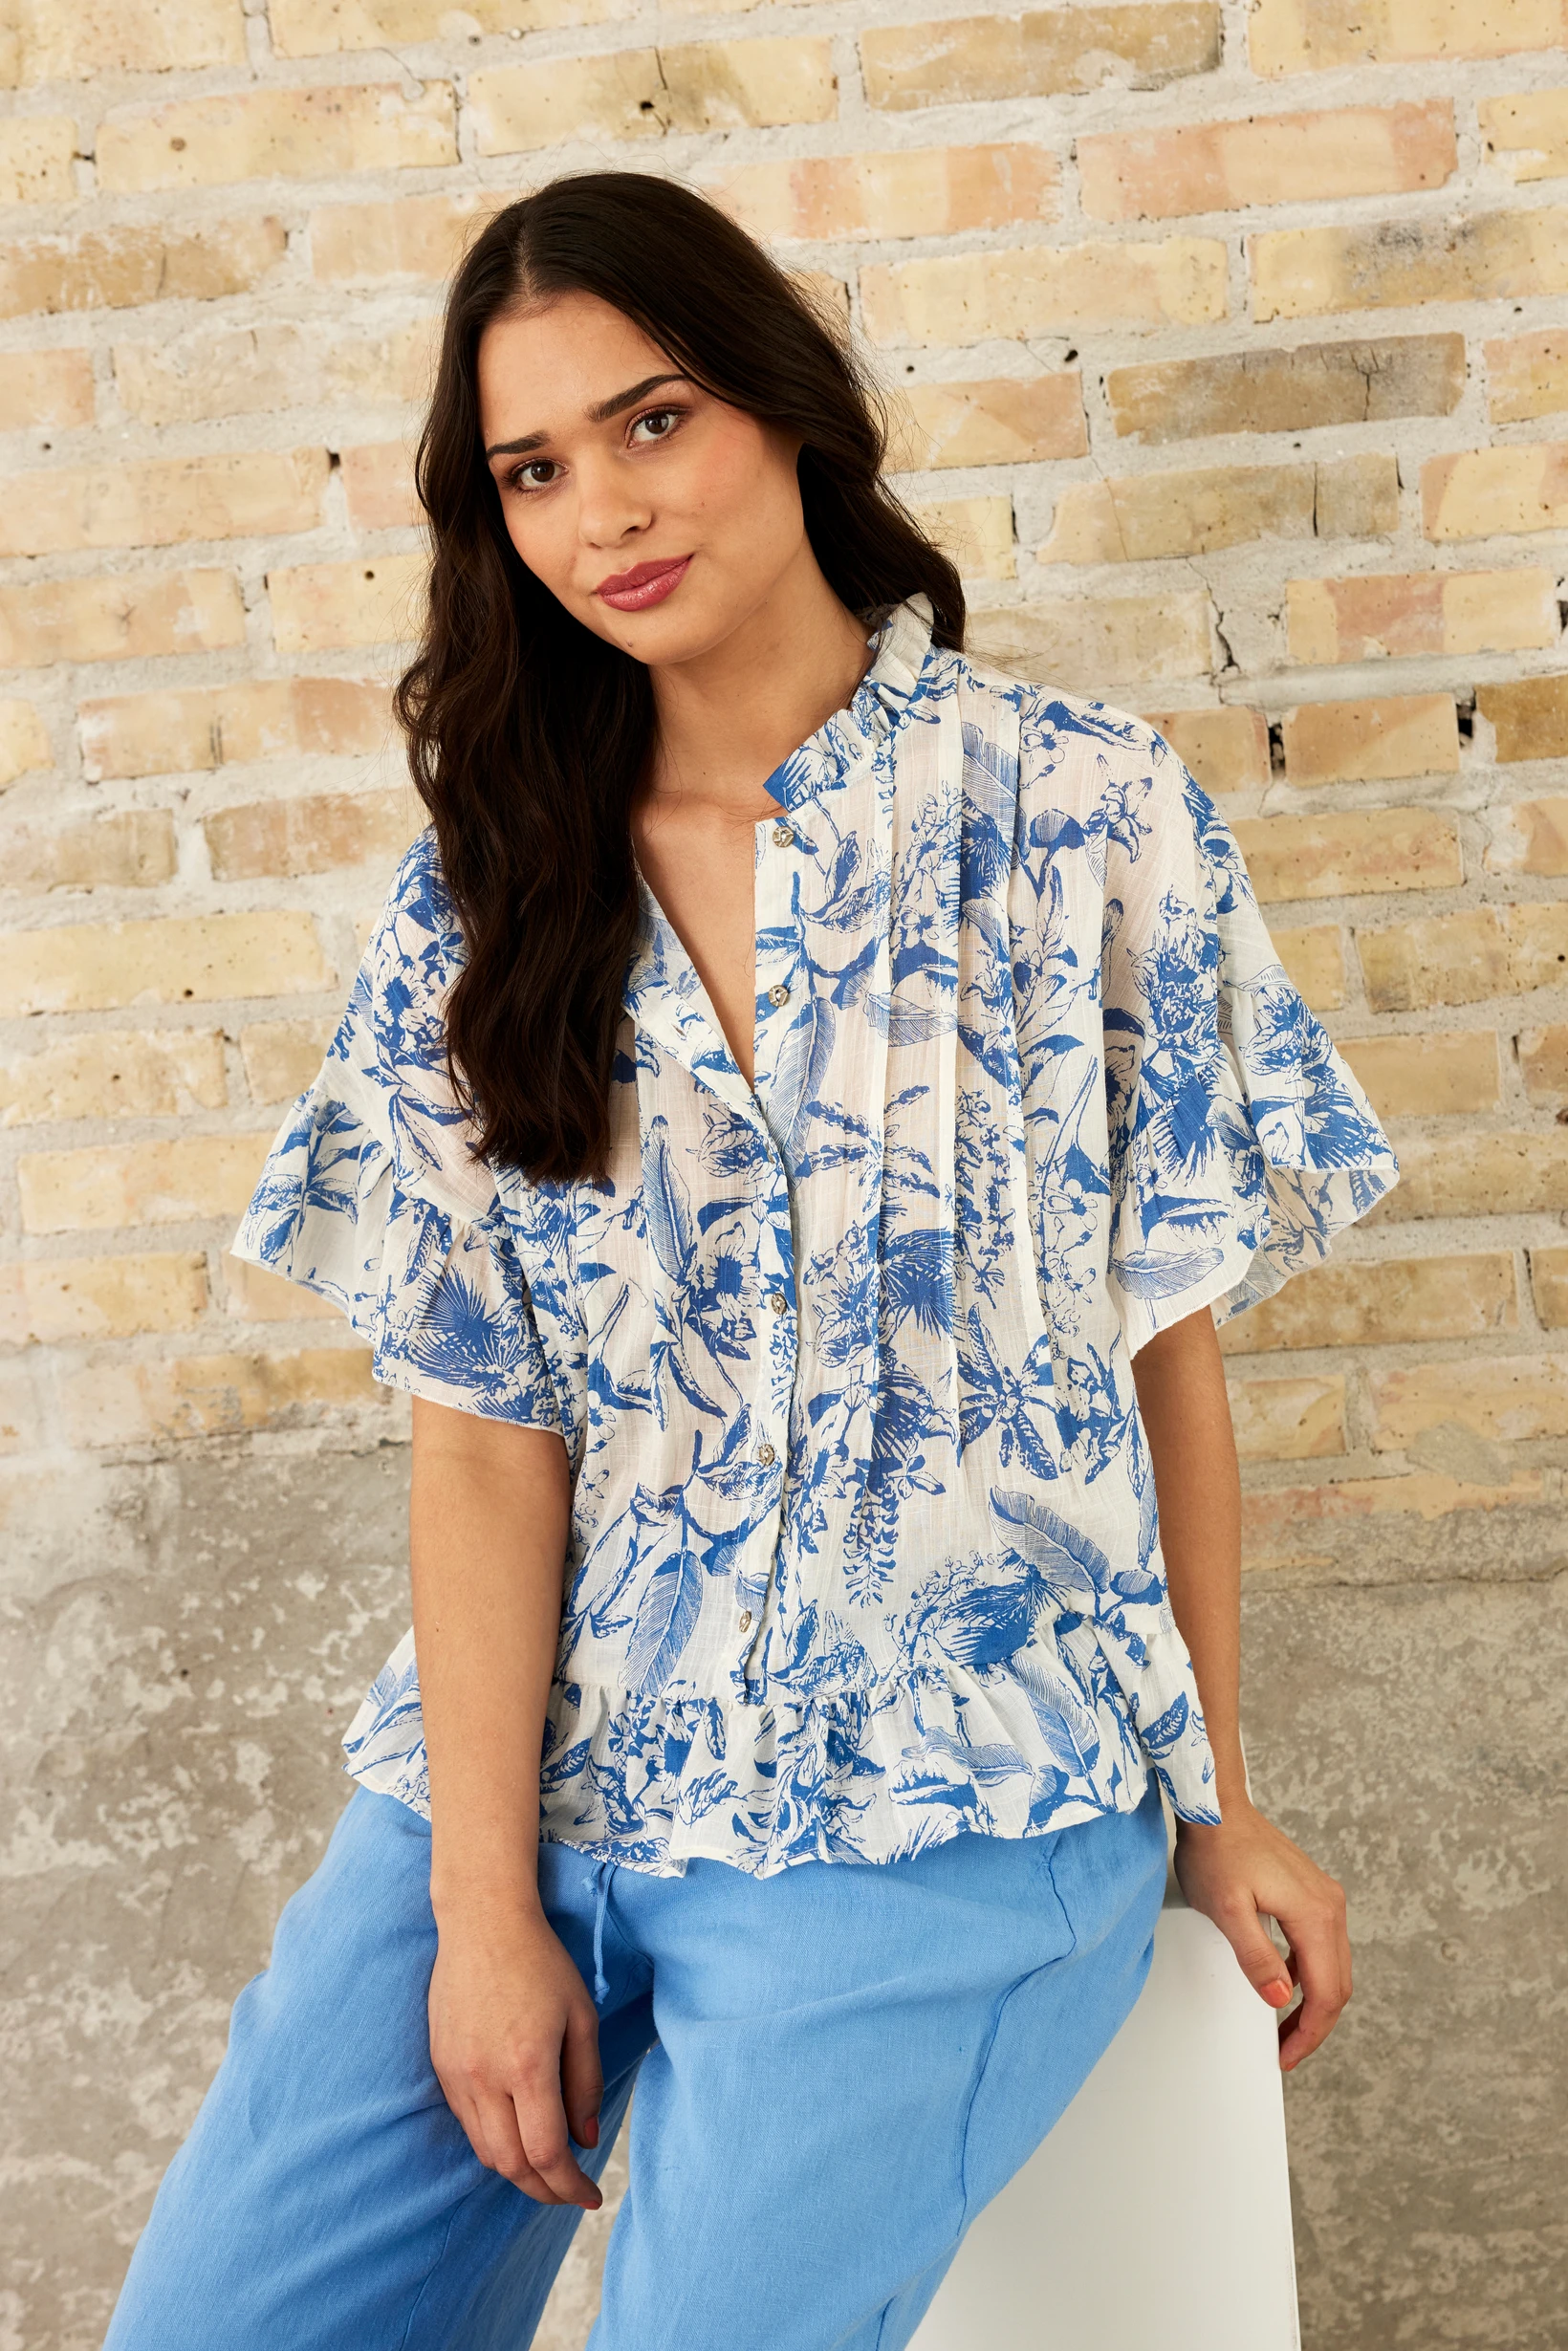 Blouses online for women- big selection - save up to 50%